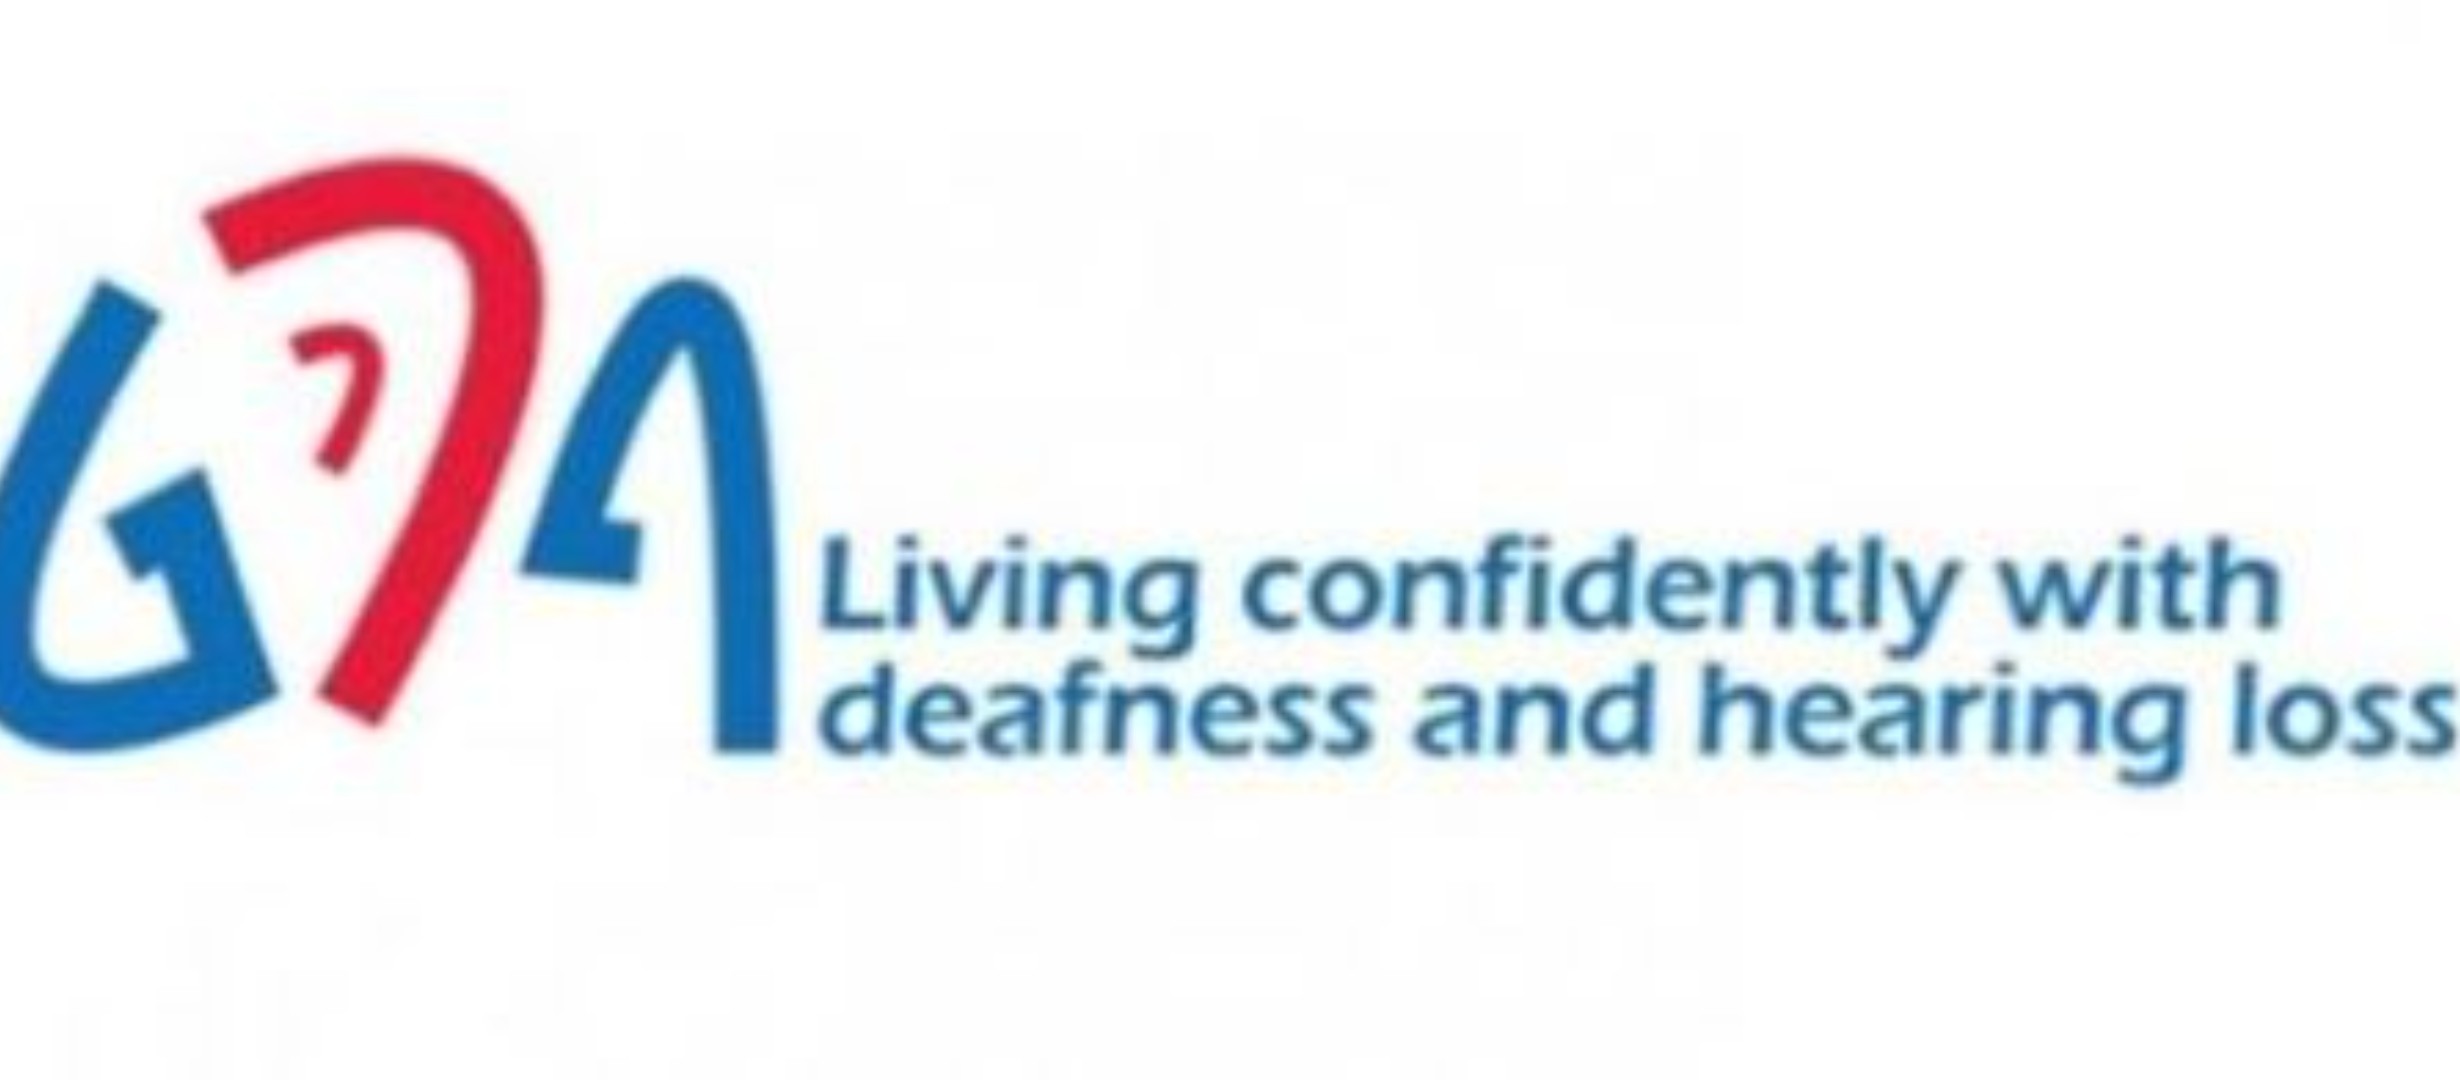 GDA Living confidently with deafness and hearing loss